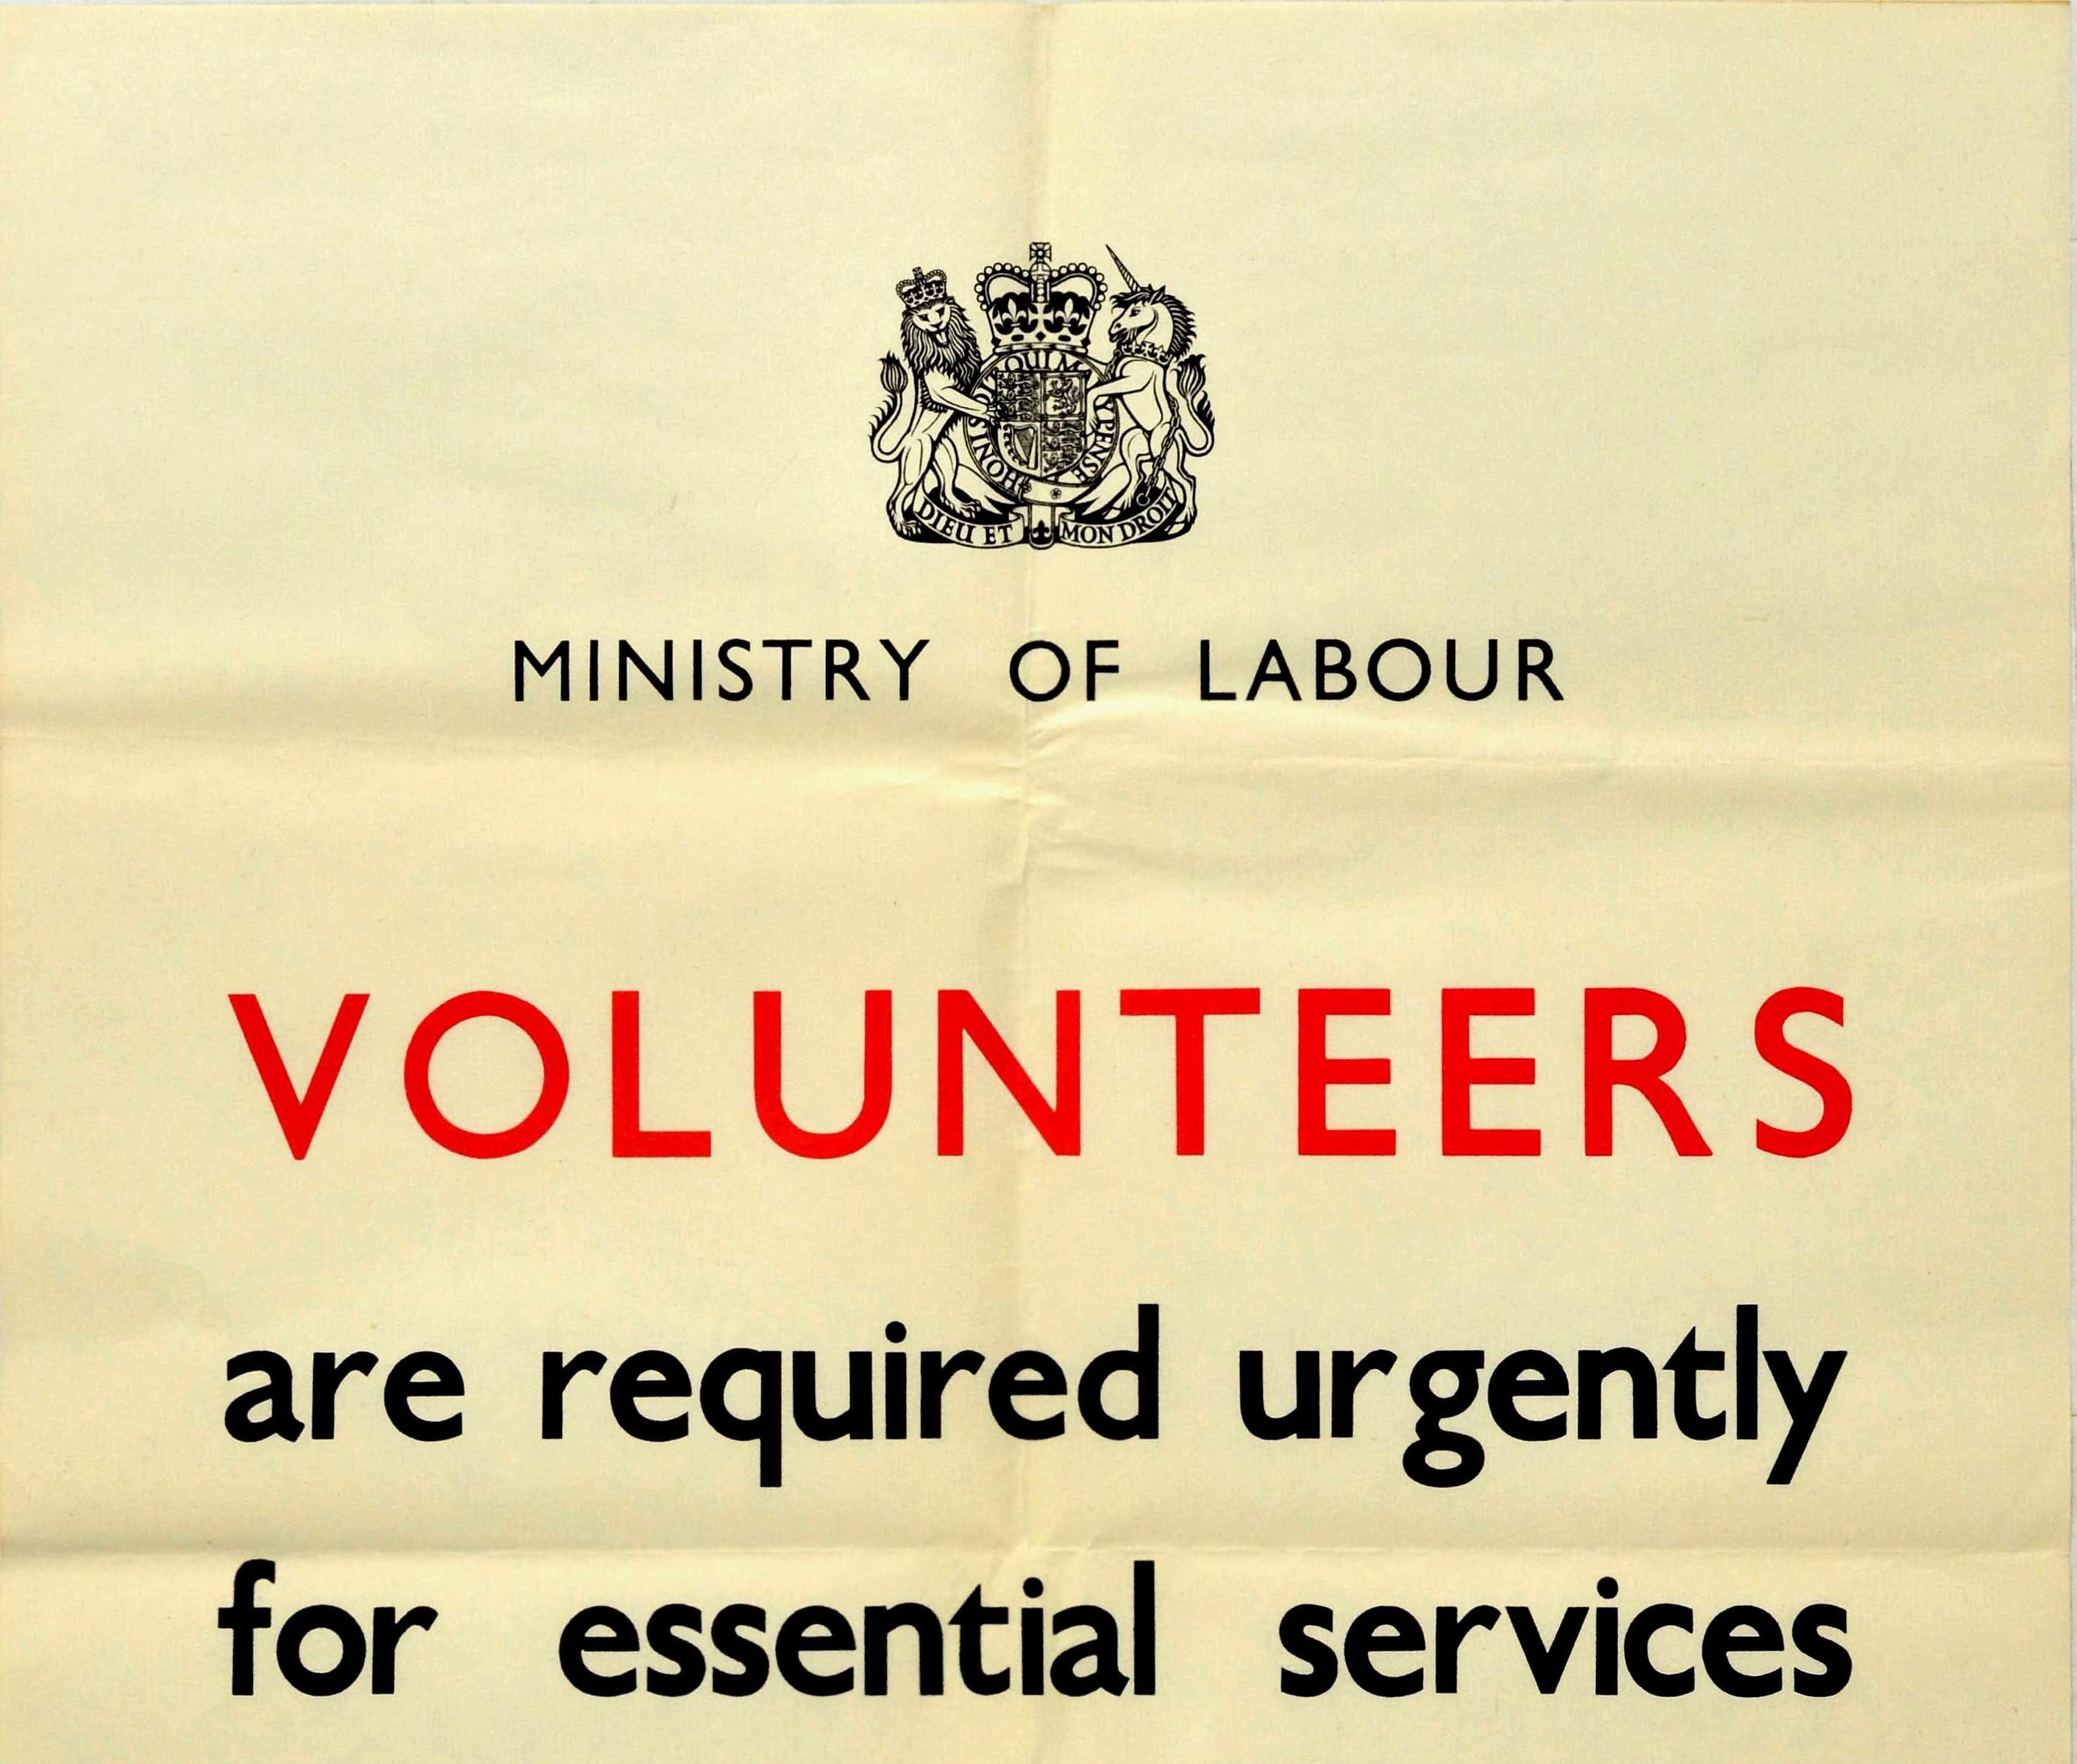 Original vintage World War Two poster - Ministry of Labour Volunteers are required urgently for essential services to maintain the life of the Nation Apply at any Employment Exchange - featuring black and red text with the royal coat of arms of the